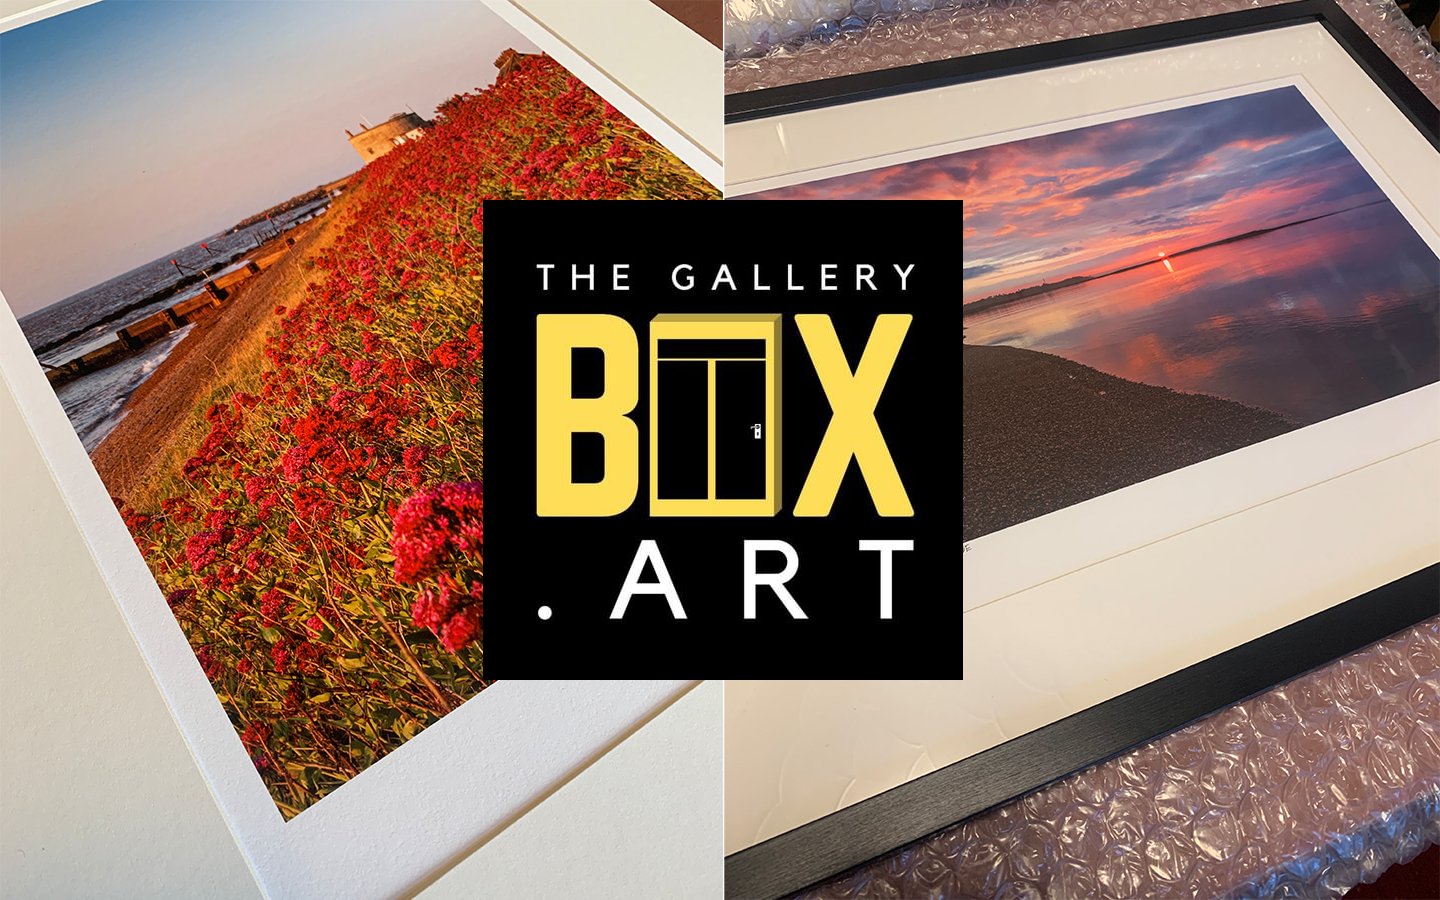 The Gallery Box Exhibition